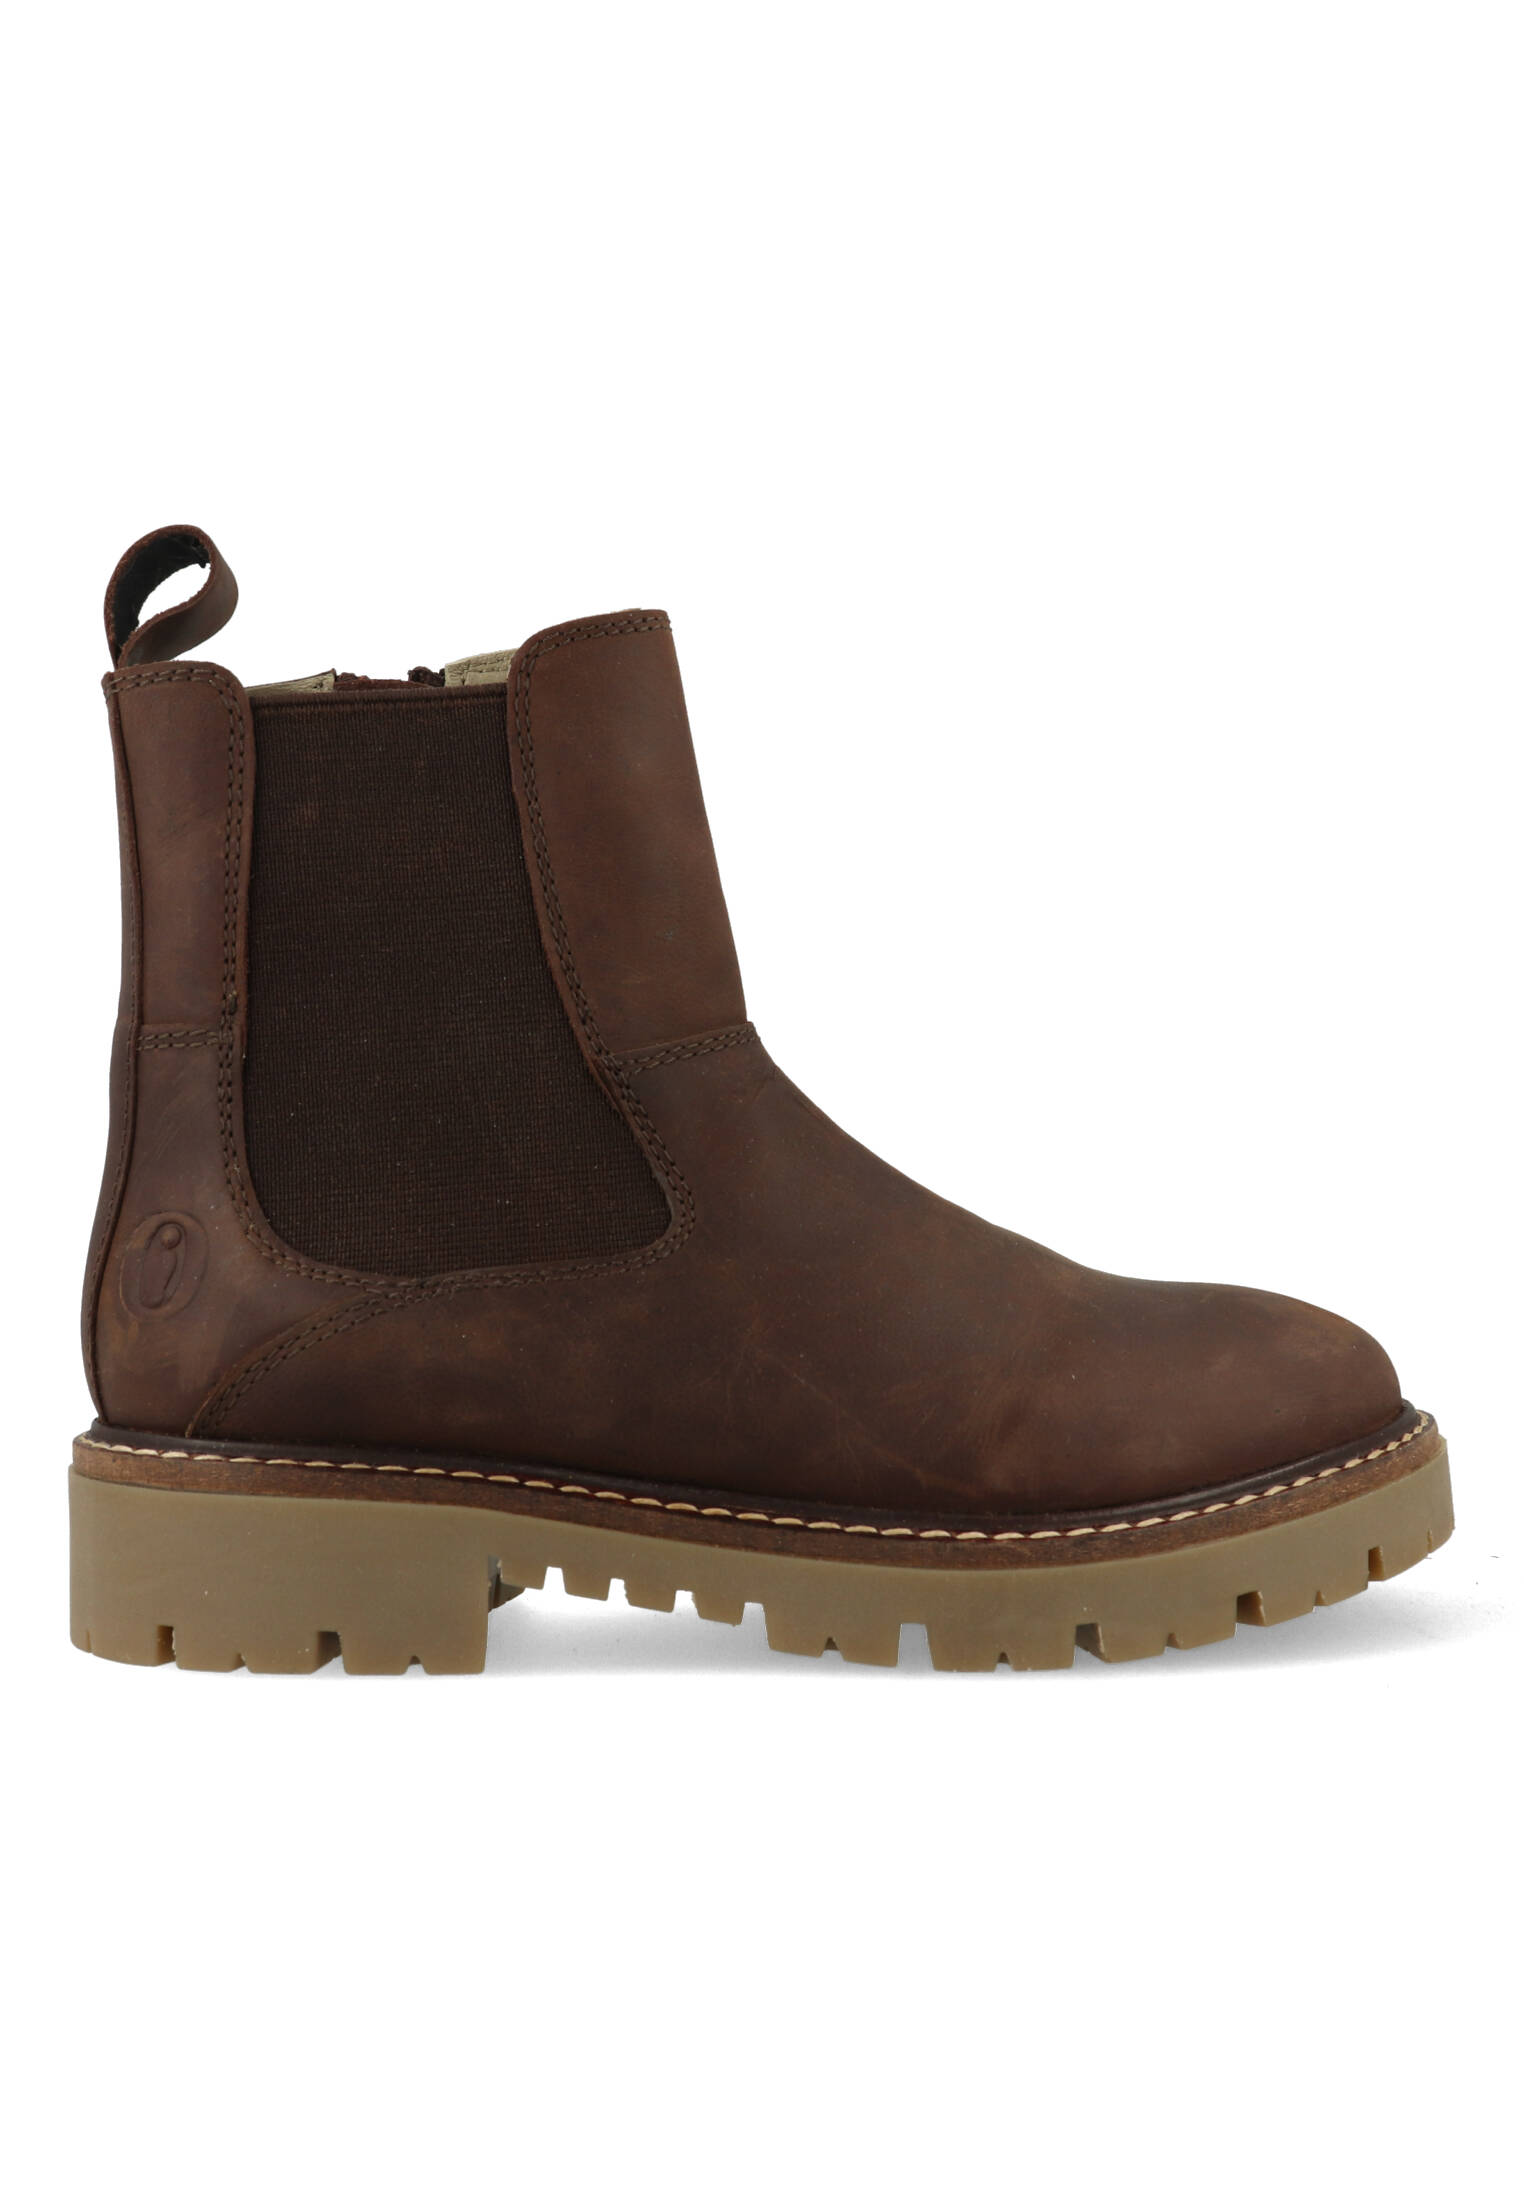 Shoesme Timber Boots TI23W119 B Donker Bruin 35 maat 35